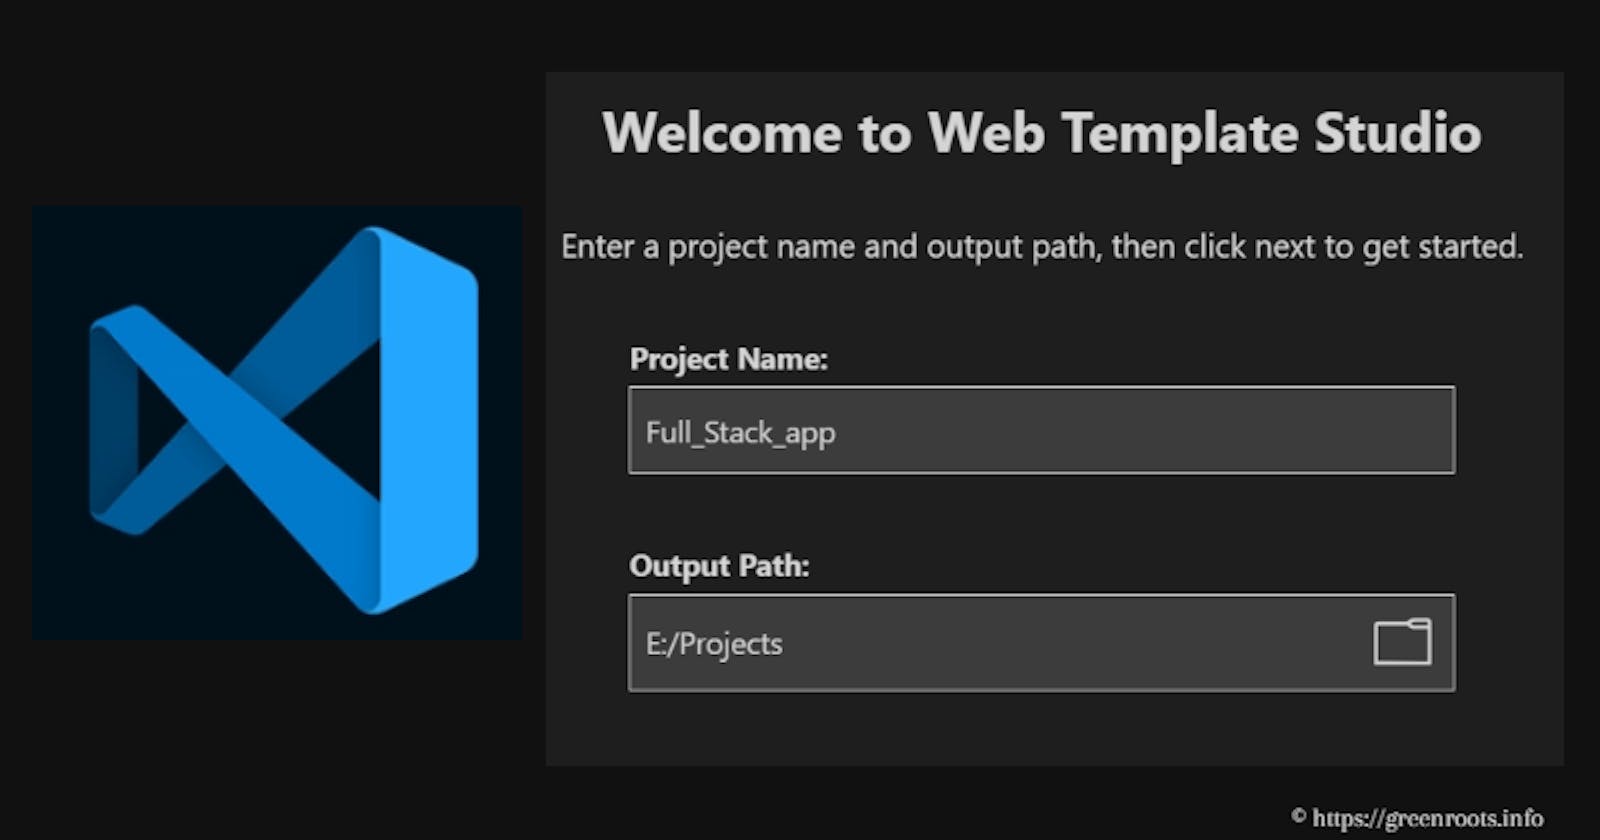 Have you looked into MS Visual Studio Code's Web Template Studio yet?